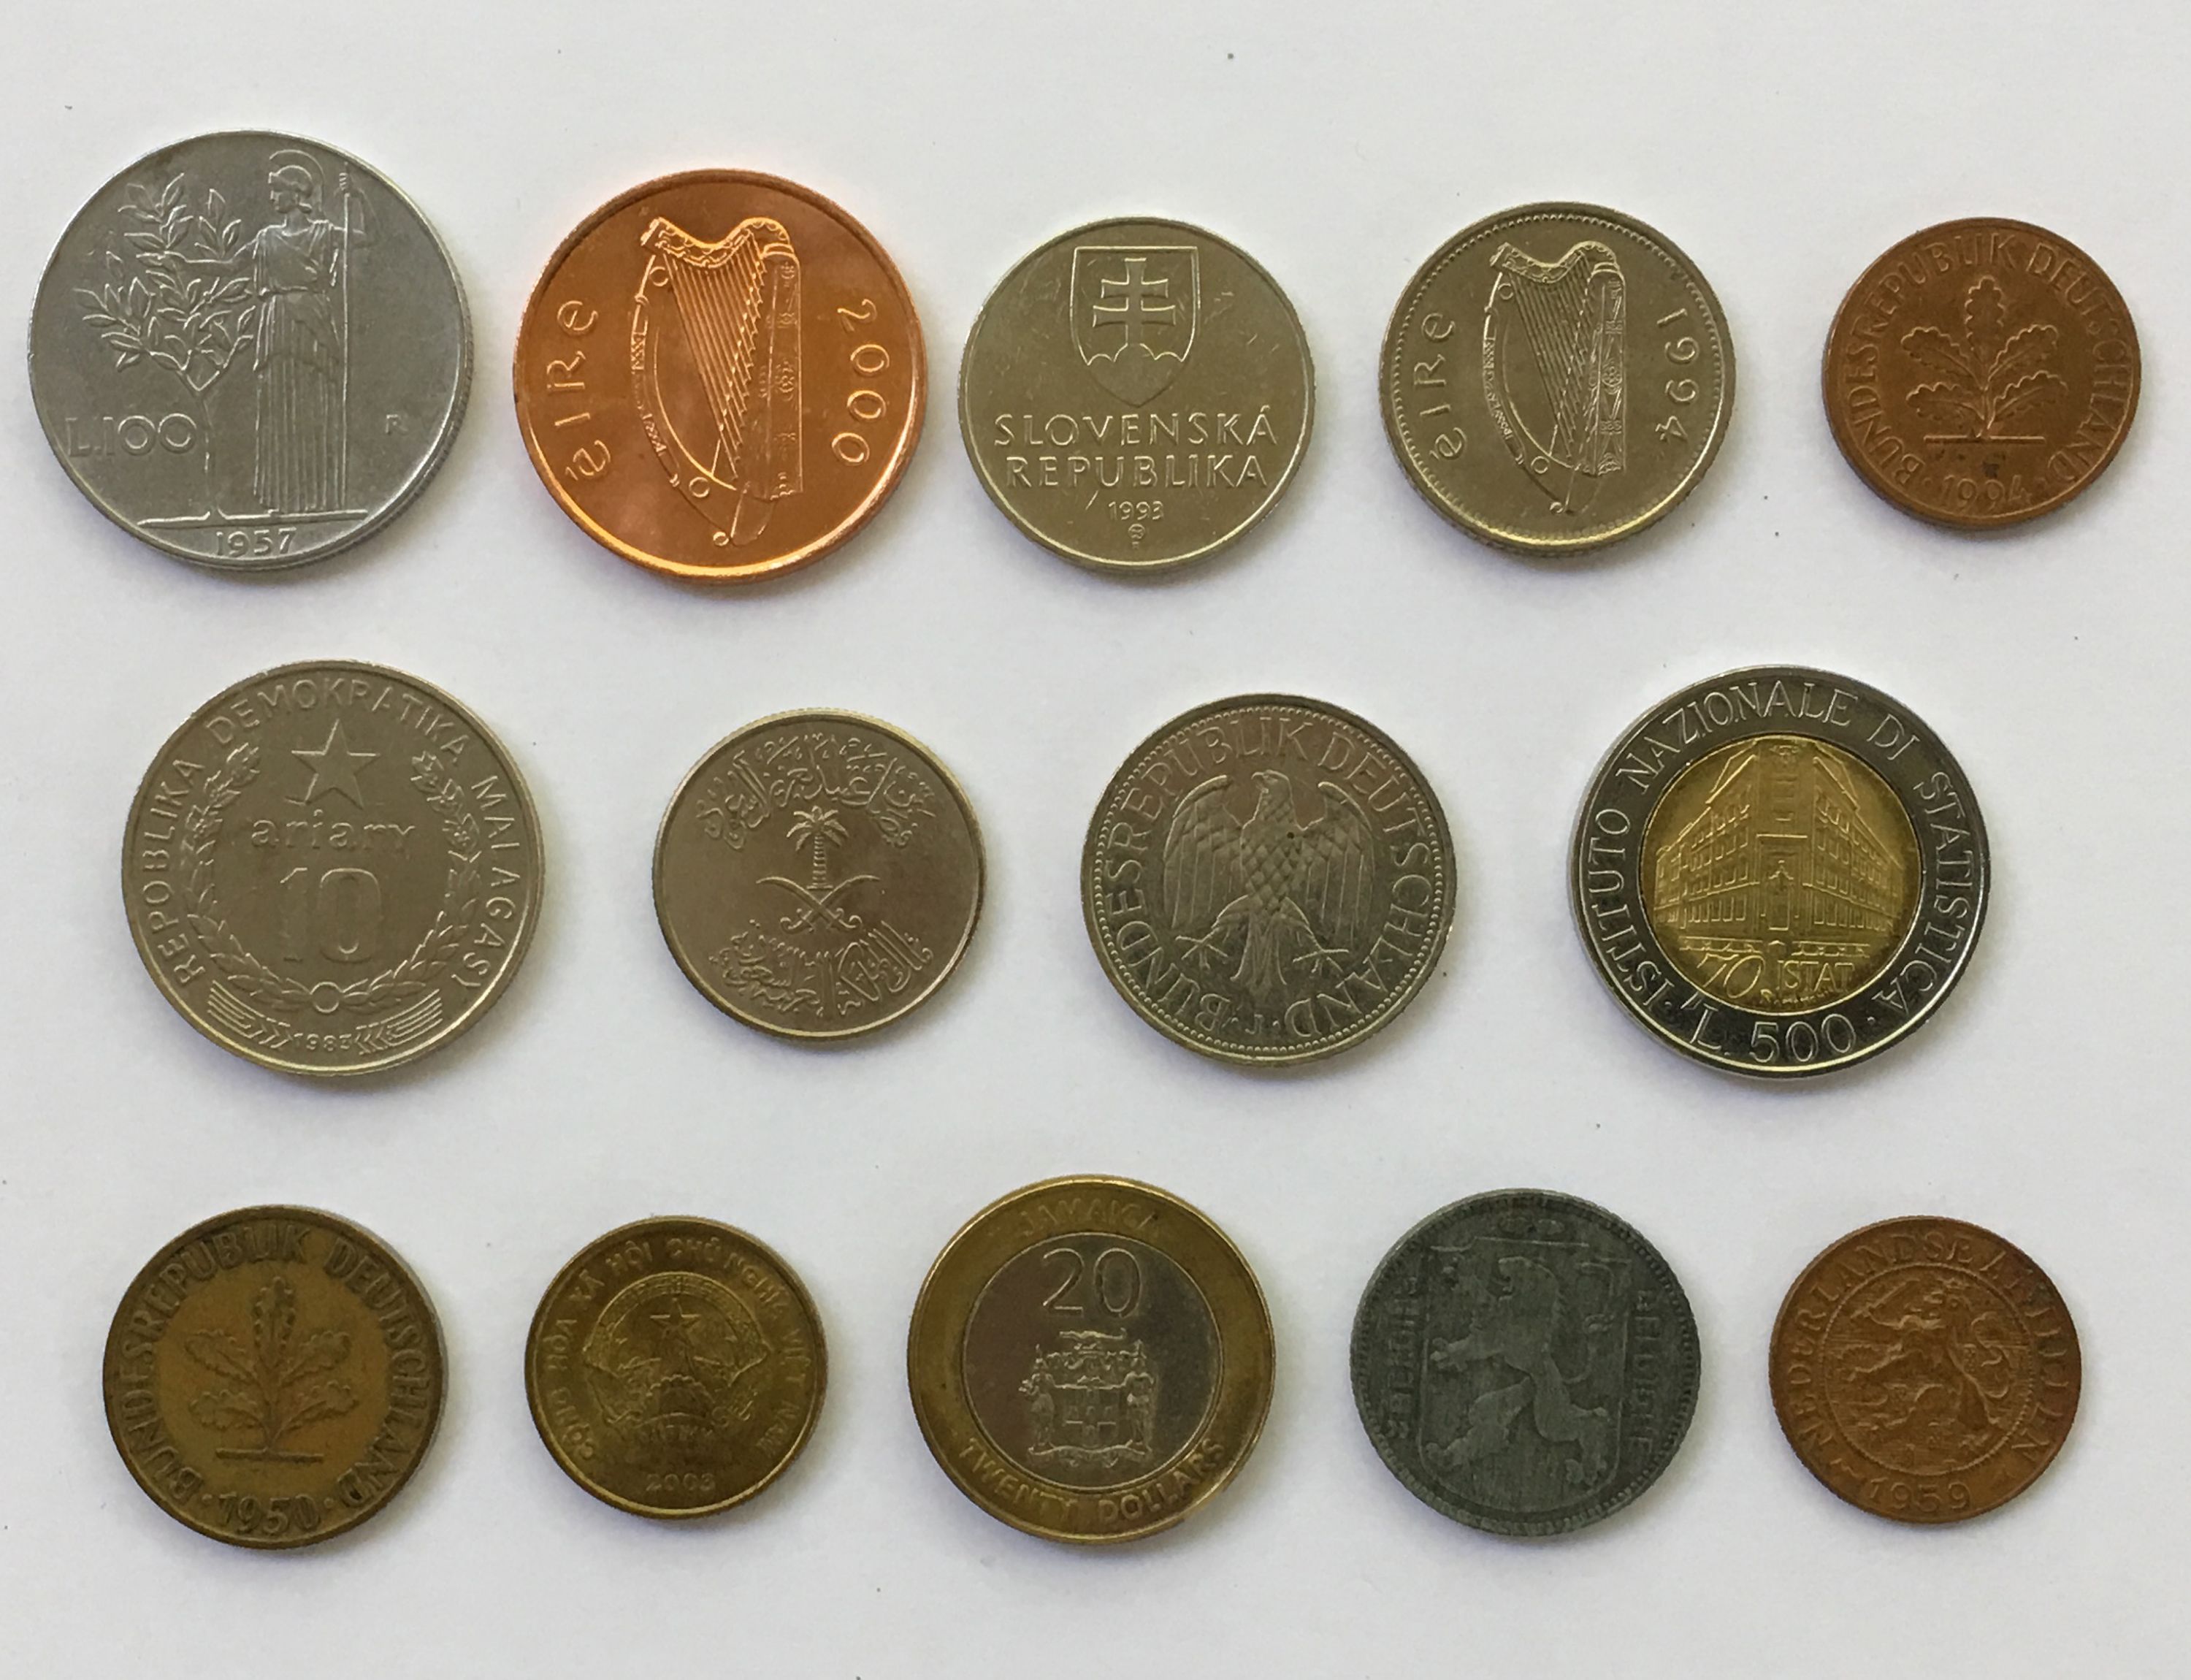 Foreign/World Coins Set #1 - 14 Coins - for sale, buy now online ...